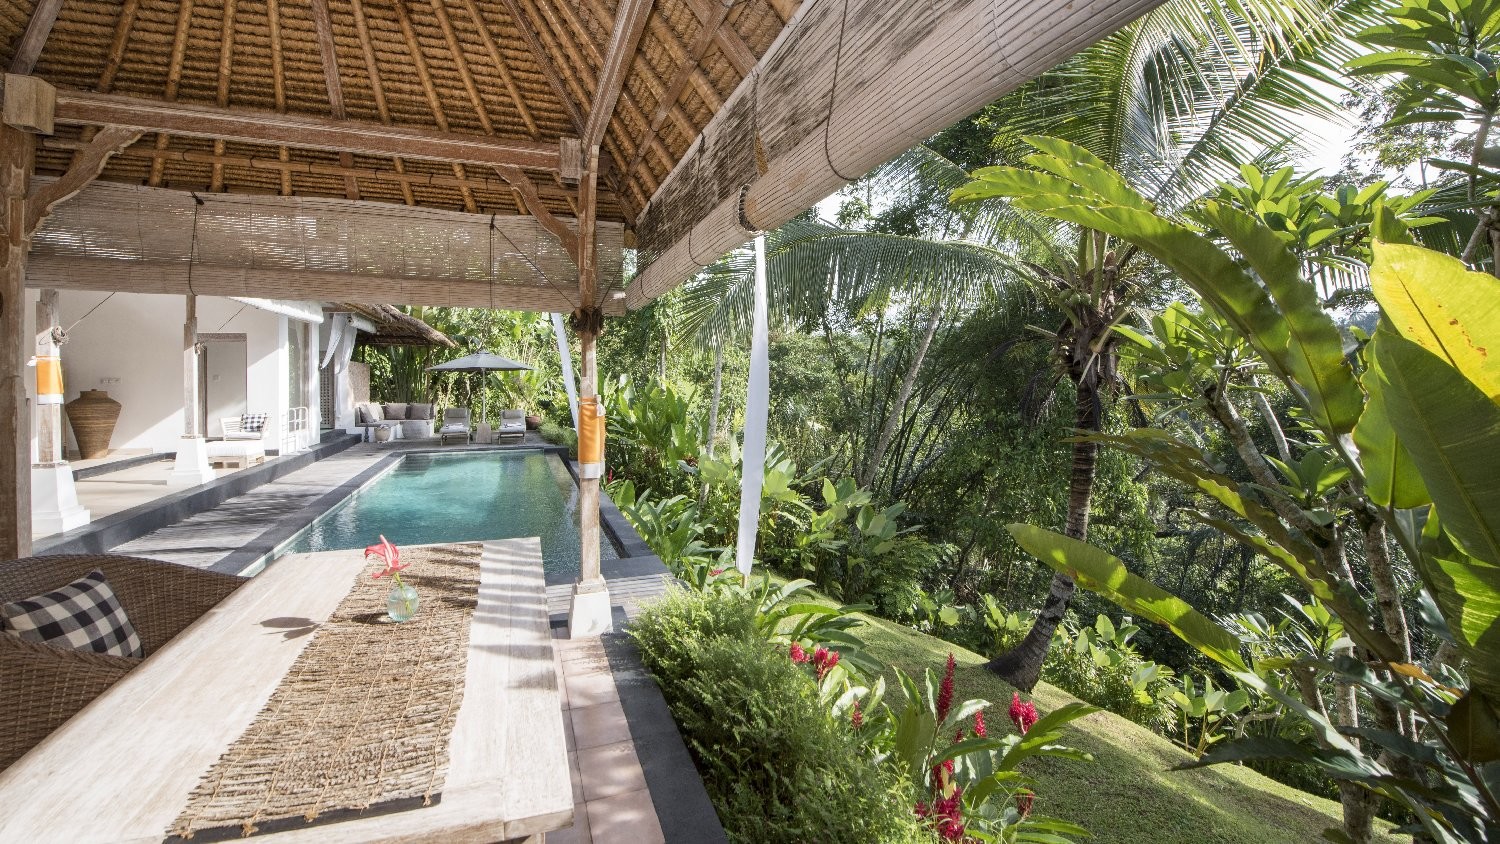 How to find the right bali villas - Villa in Ubud